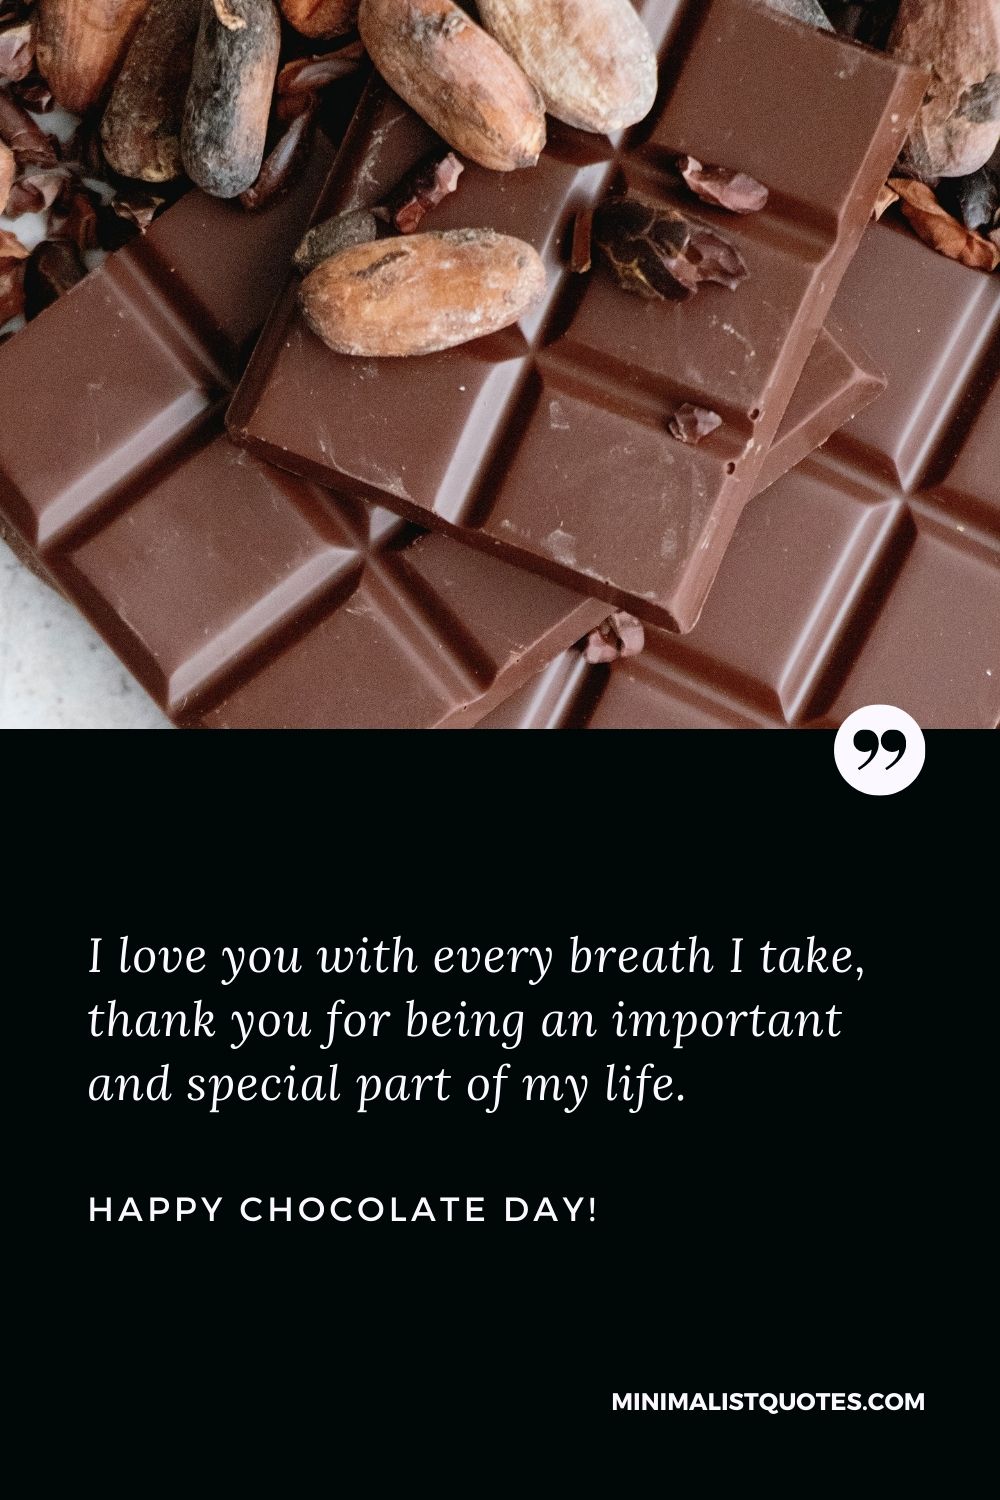 Pin on Chocolate Quotes